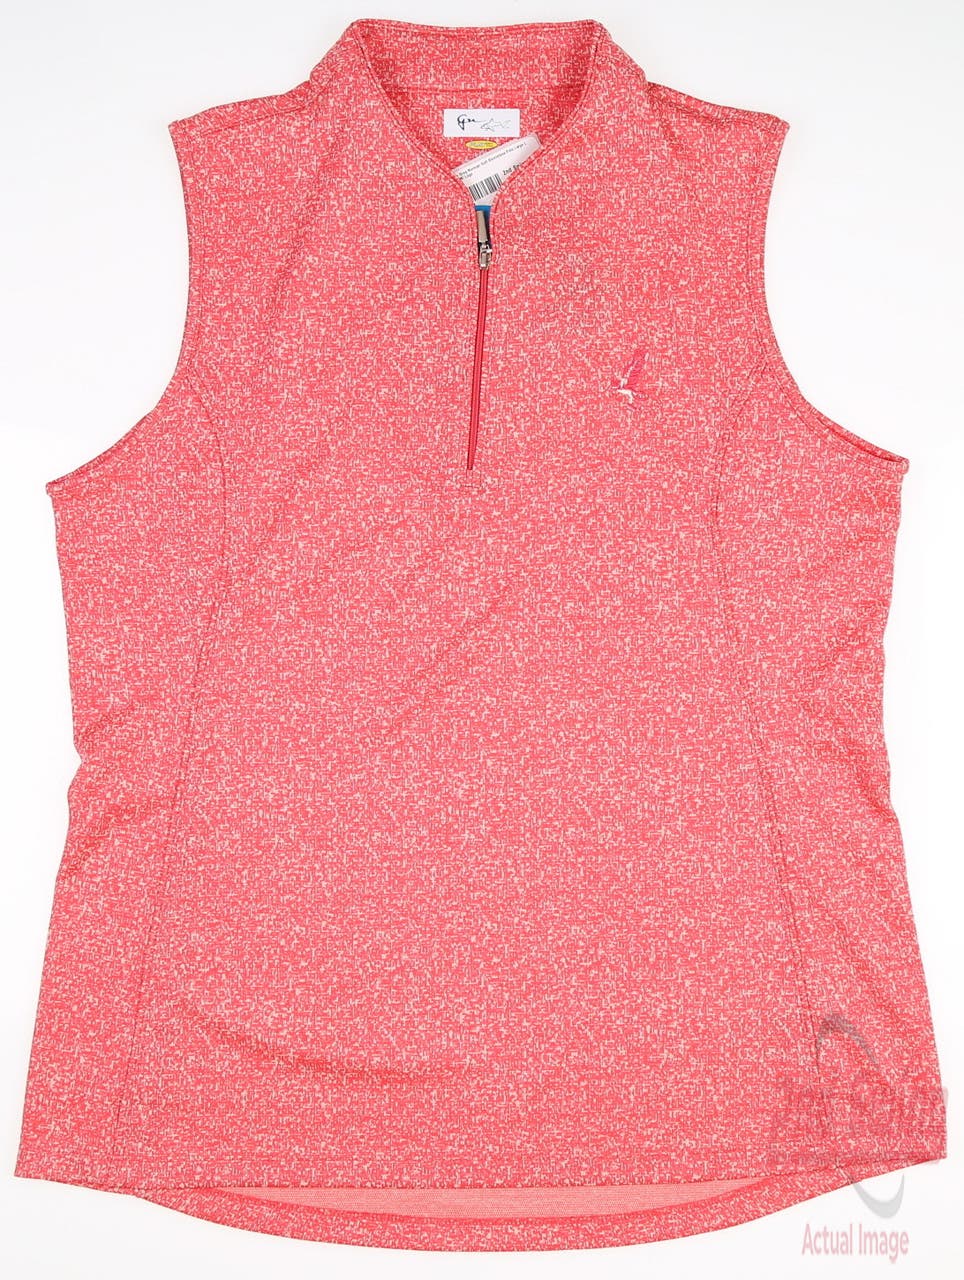 New W/ Logo Womens Greg Norman Golf Sleeveless Polo Large L Red MSRP $75